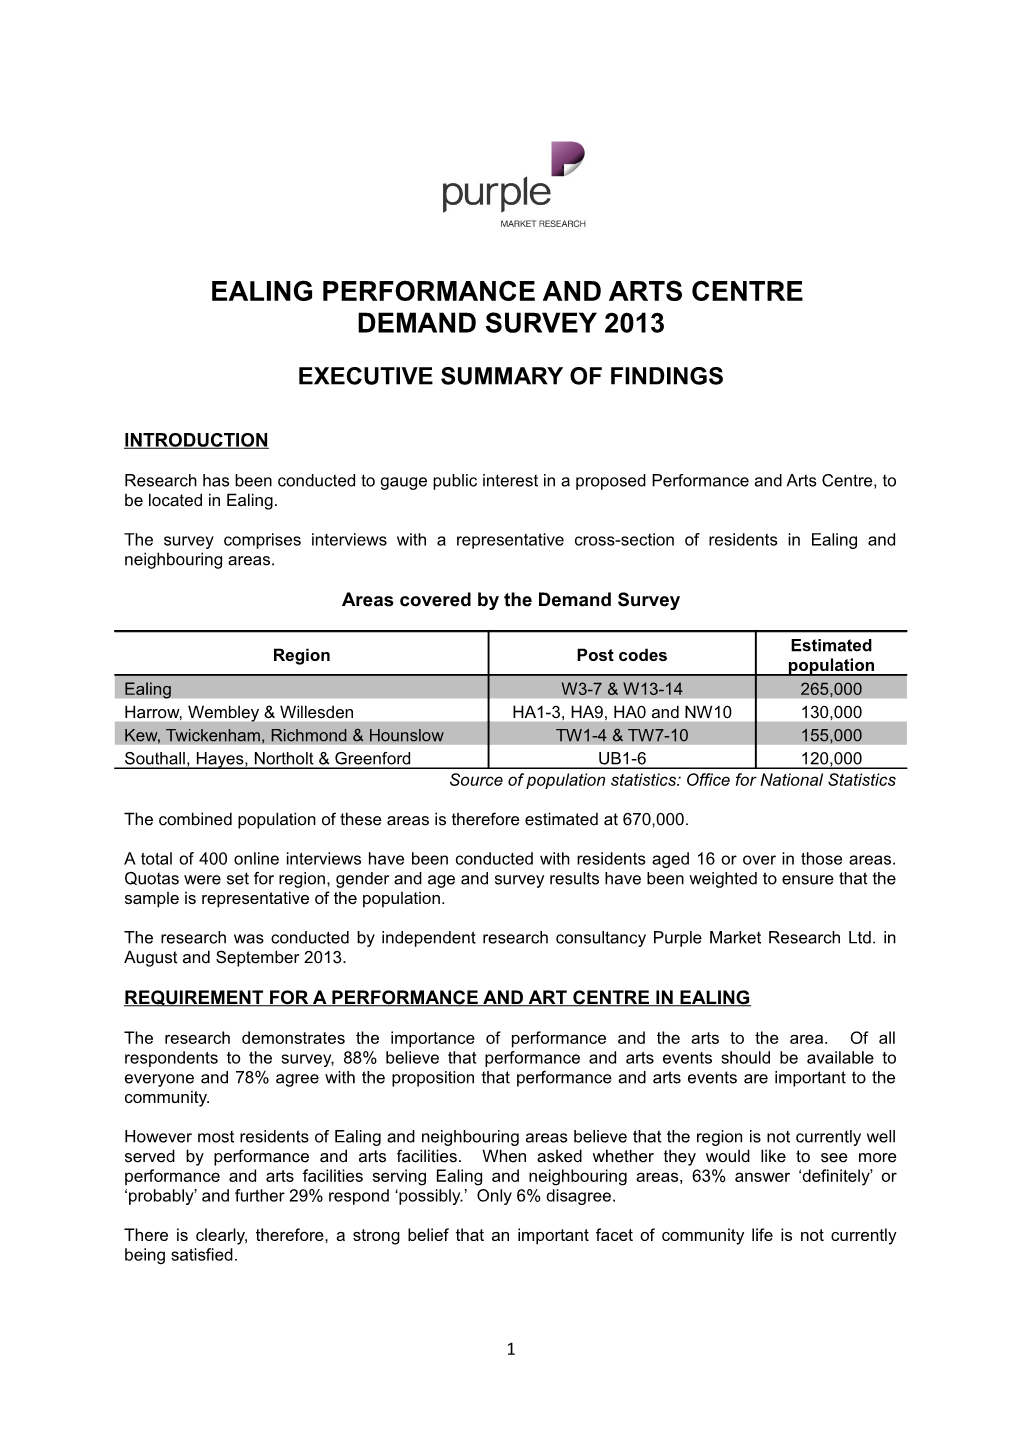 Ealing Performance and Arts Centre